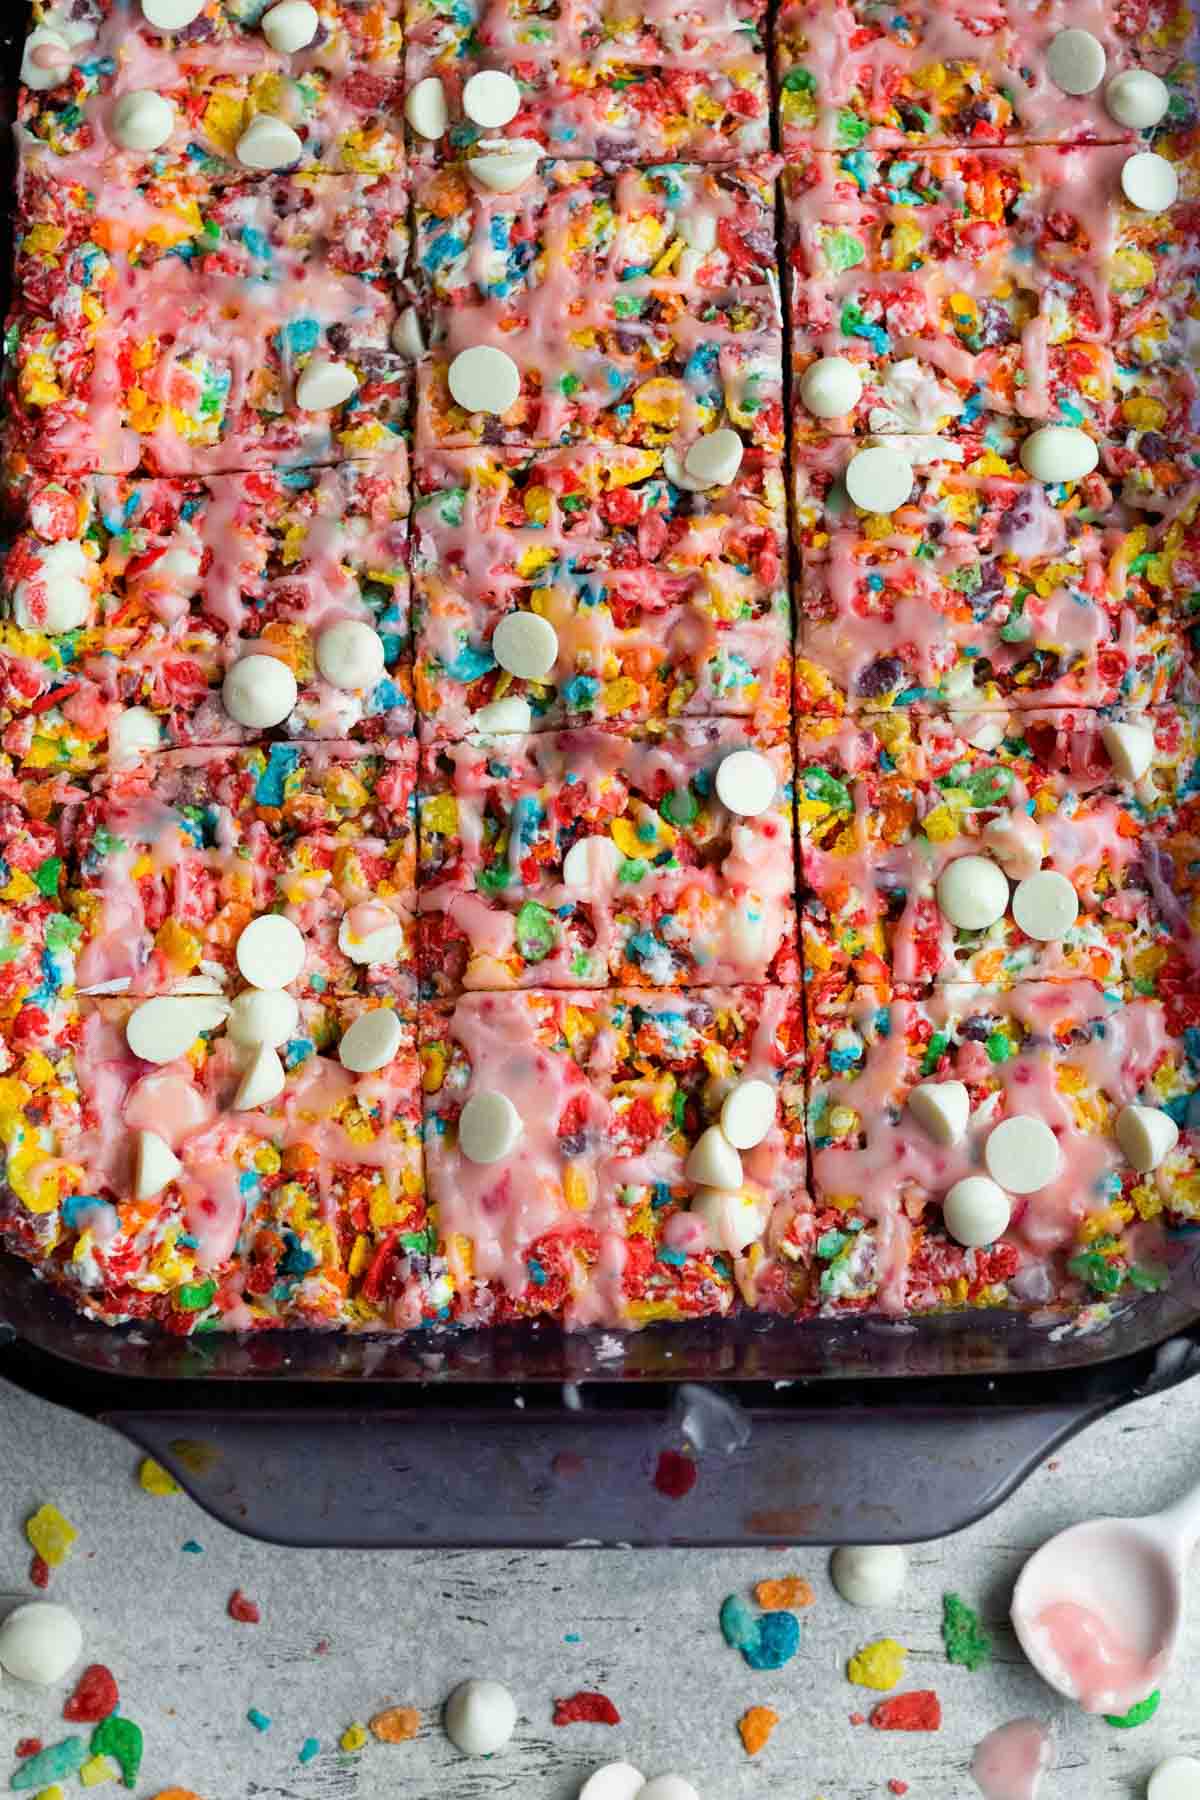 Rectangle cuts into the Fruity Pebble Treats splashed with pink fruity drizzle.